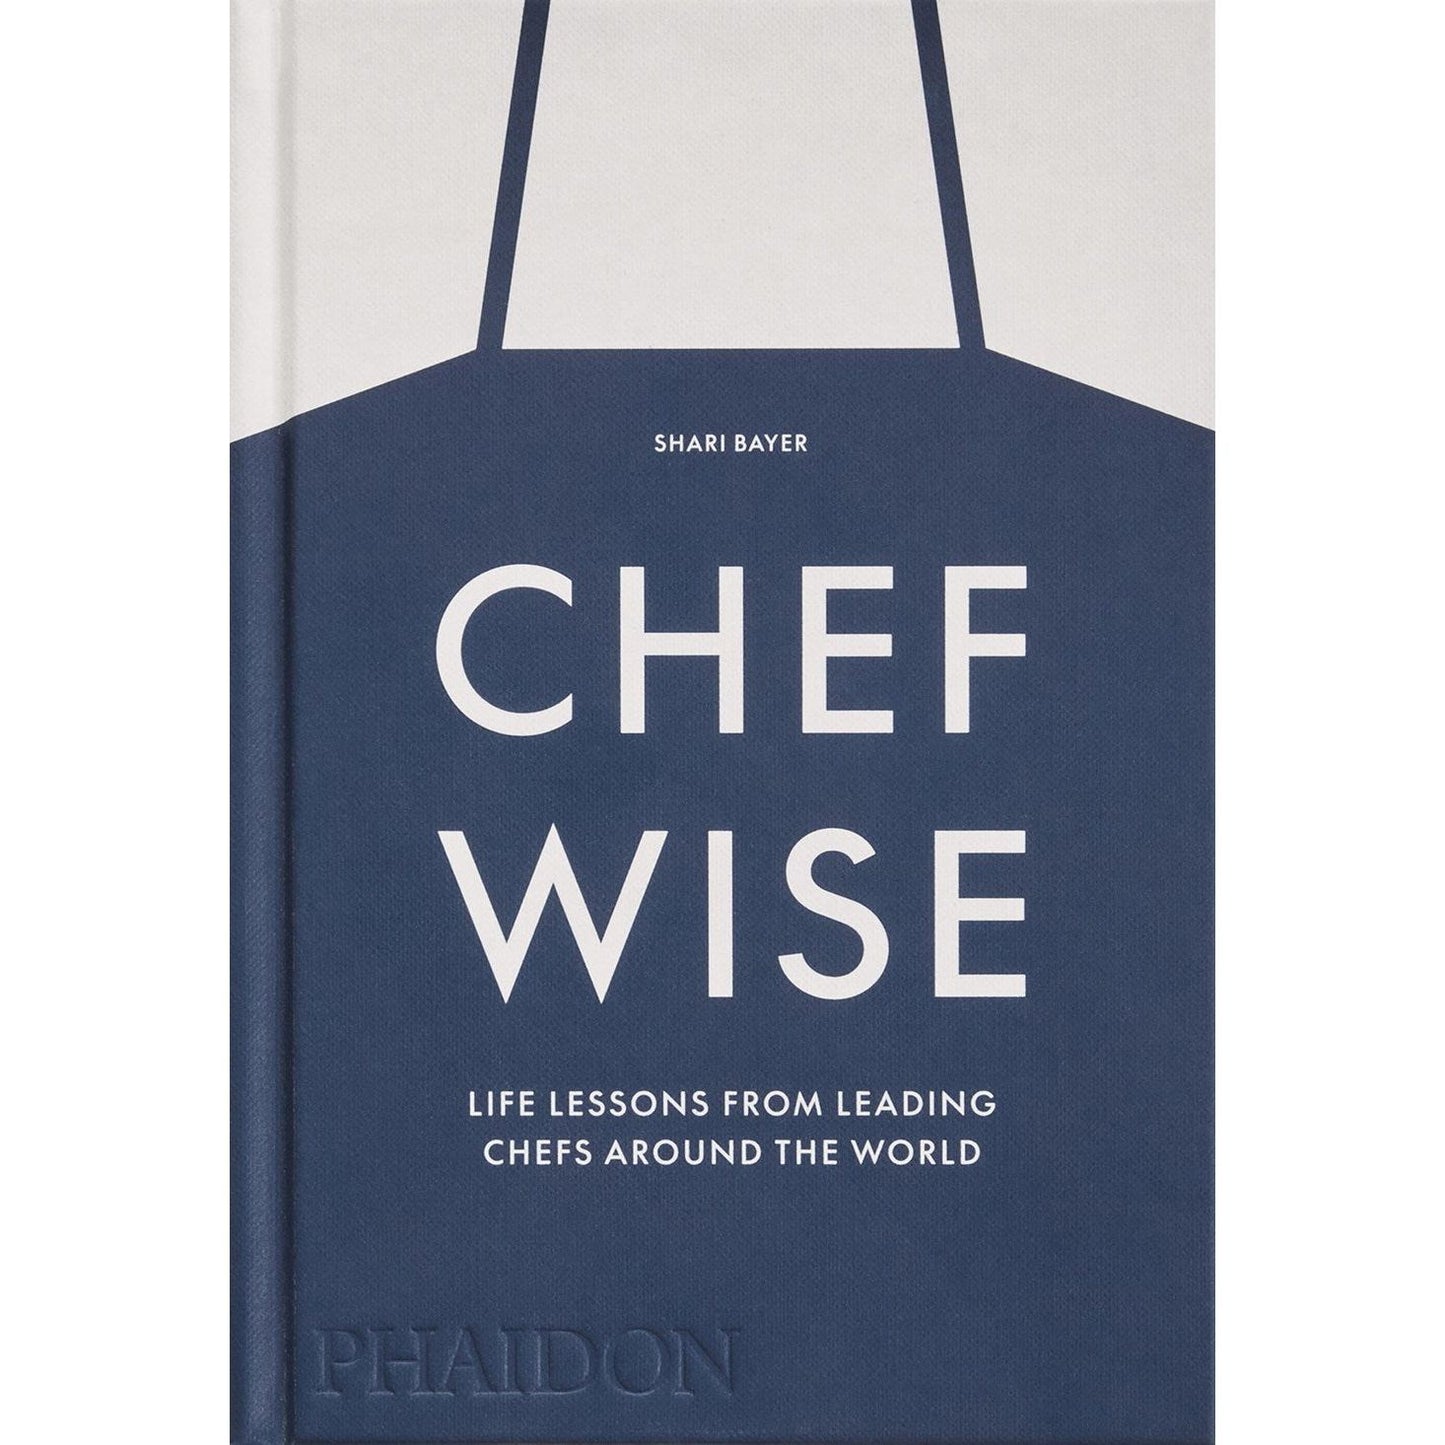 Chefwise: Life Lessons from Leading Chefs Around the World (Shari Bayer)